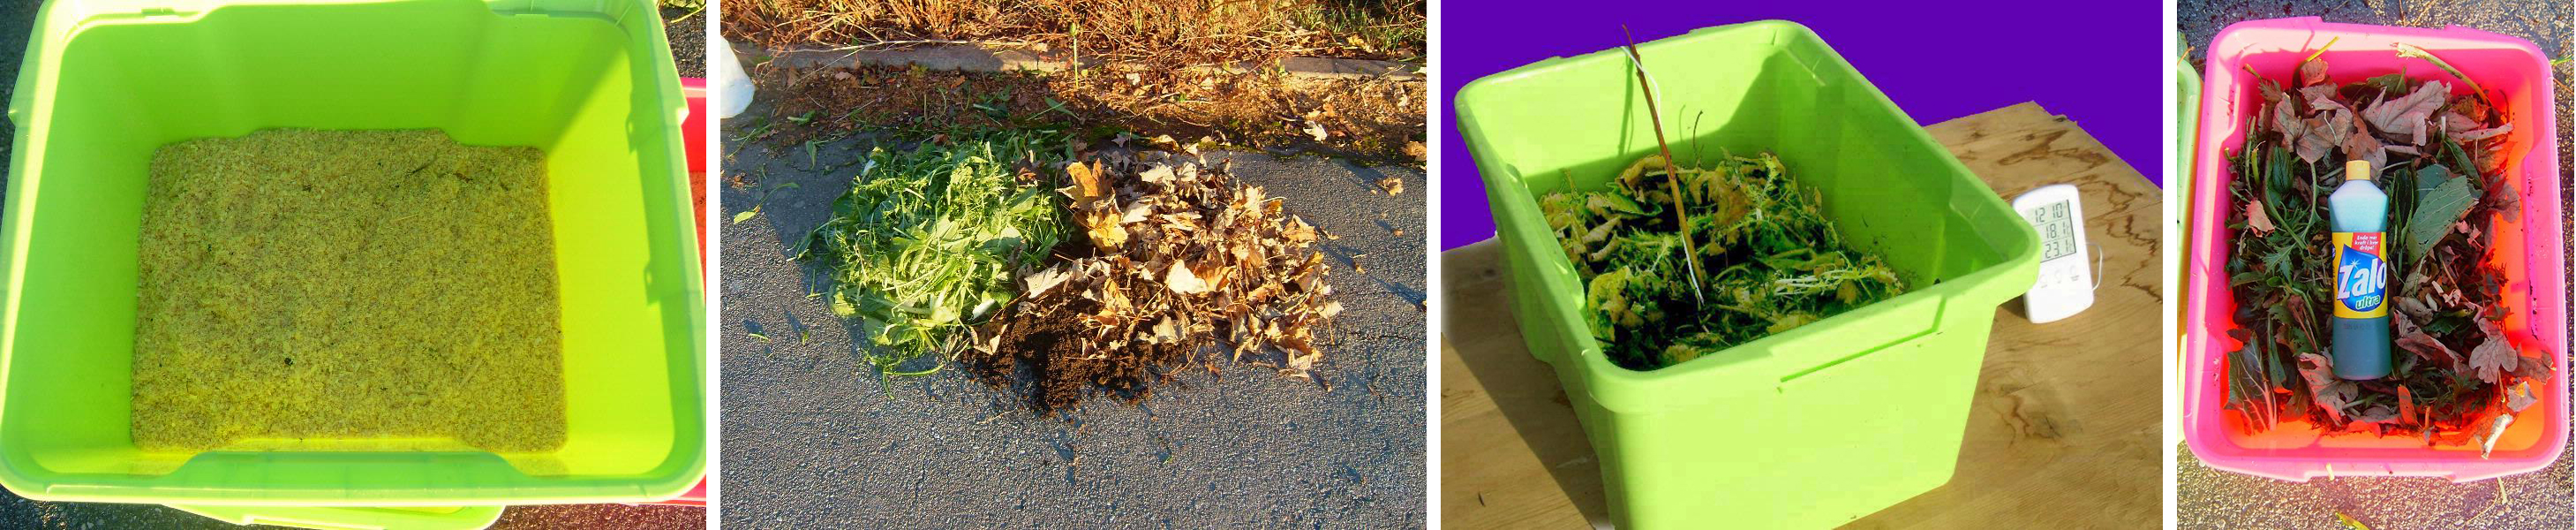 Classroom compost box - Step 1 to 3